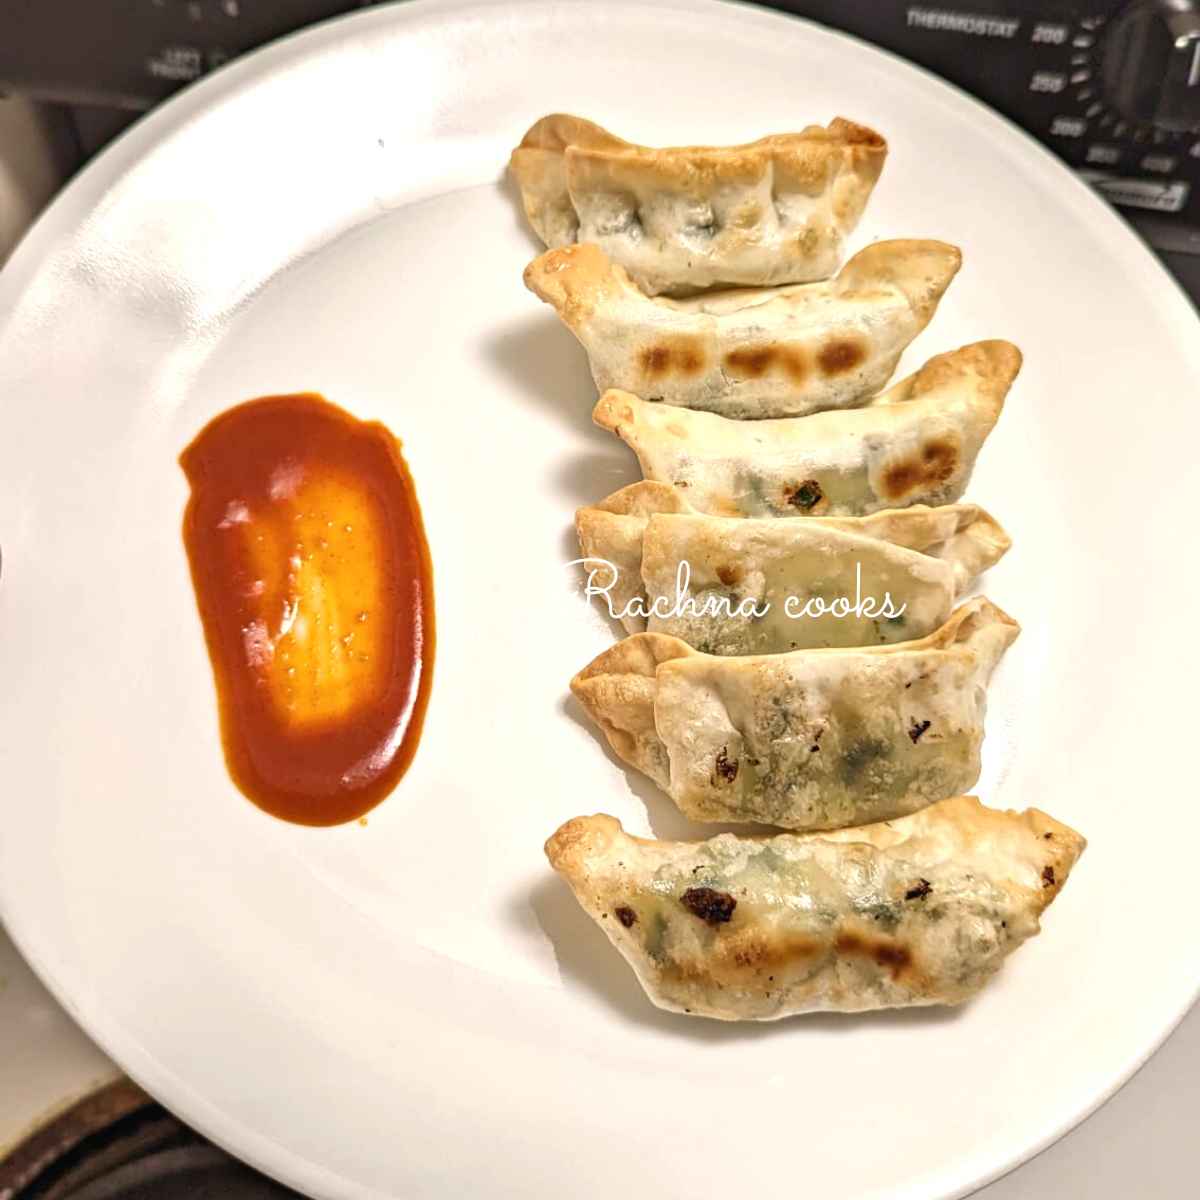 Gyozas or potstickers after air frying served on a white plate.